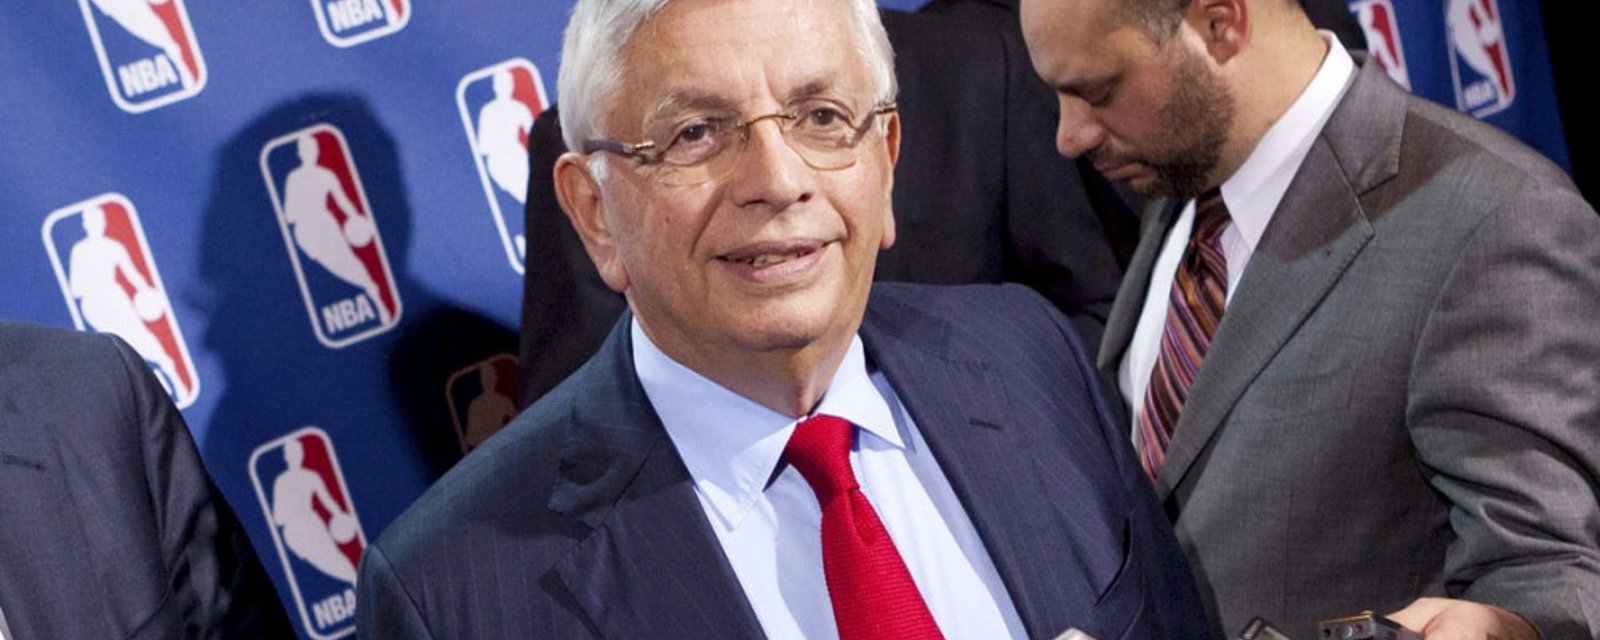 Gary Bettman comments on the passing of long-time NBA commissioner David Stern